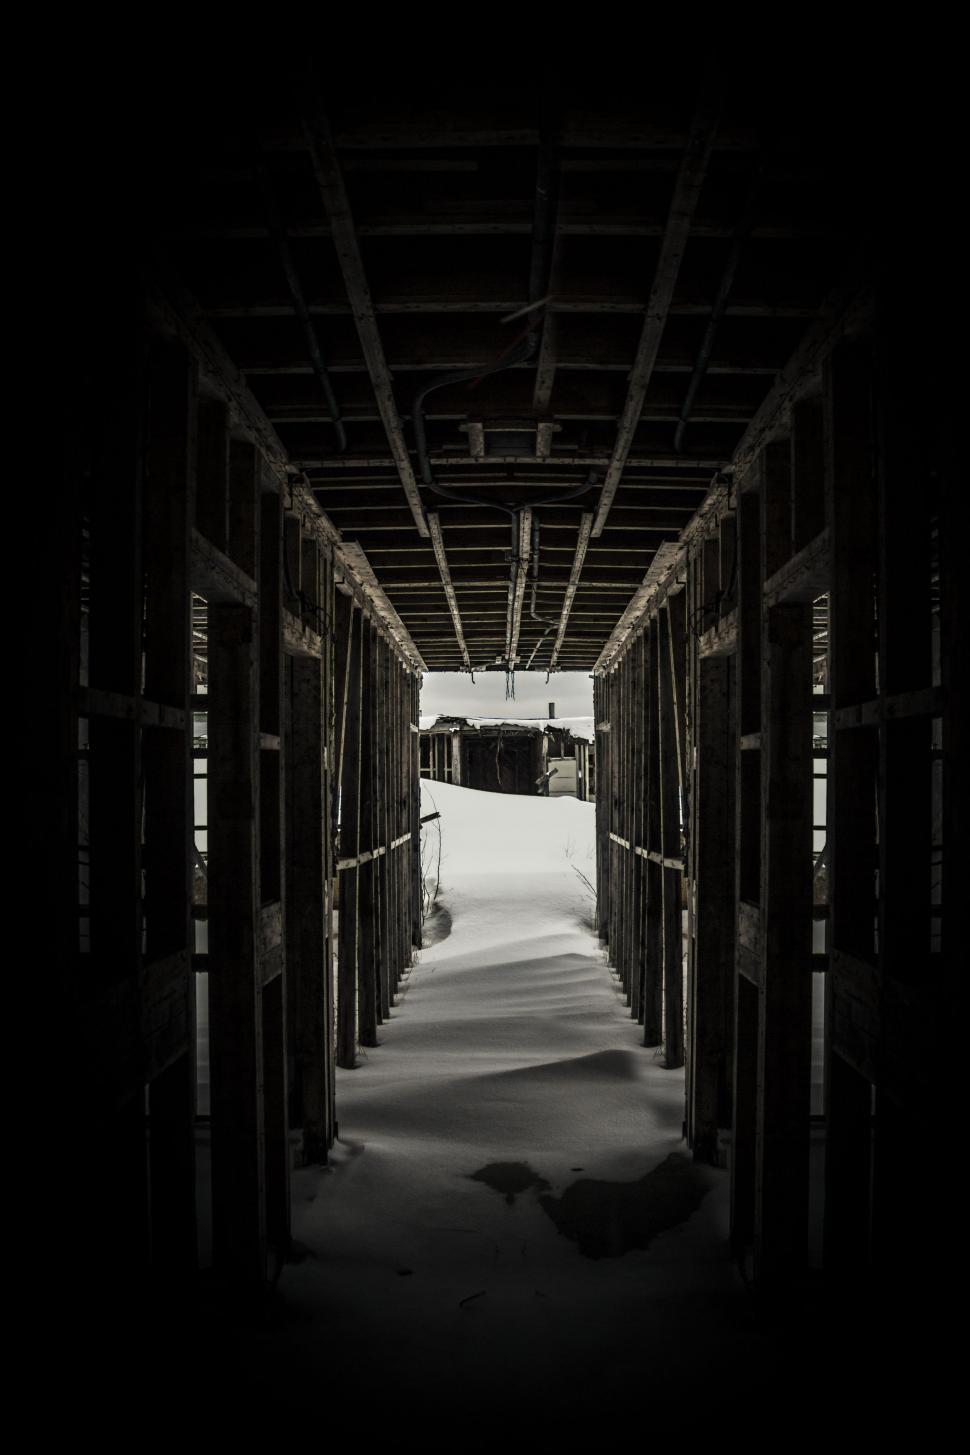 Free Image of Snow-covered Walkway in Black and White 